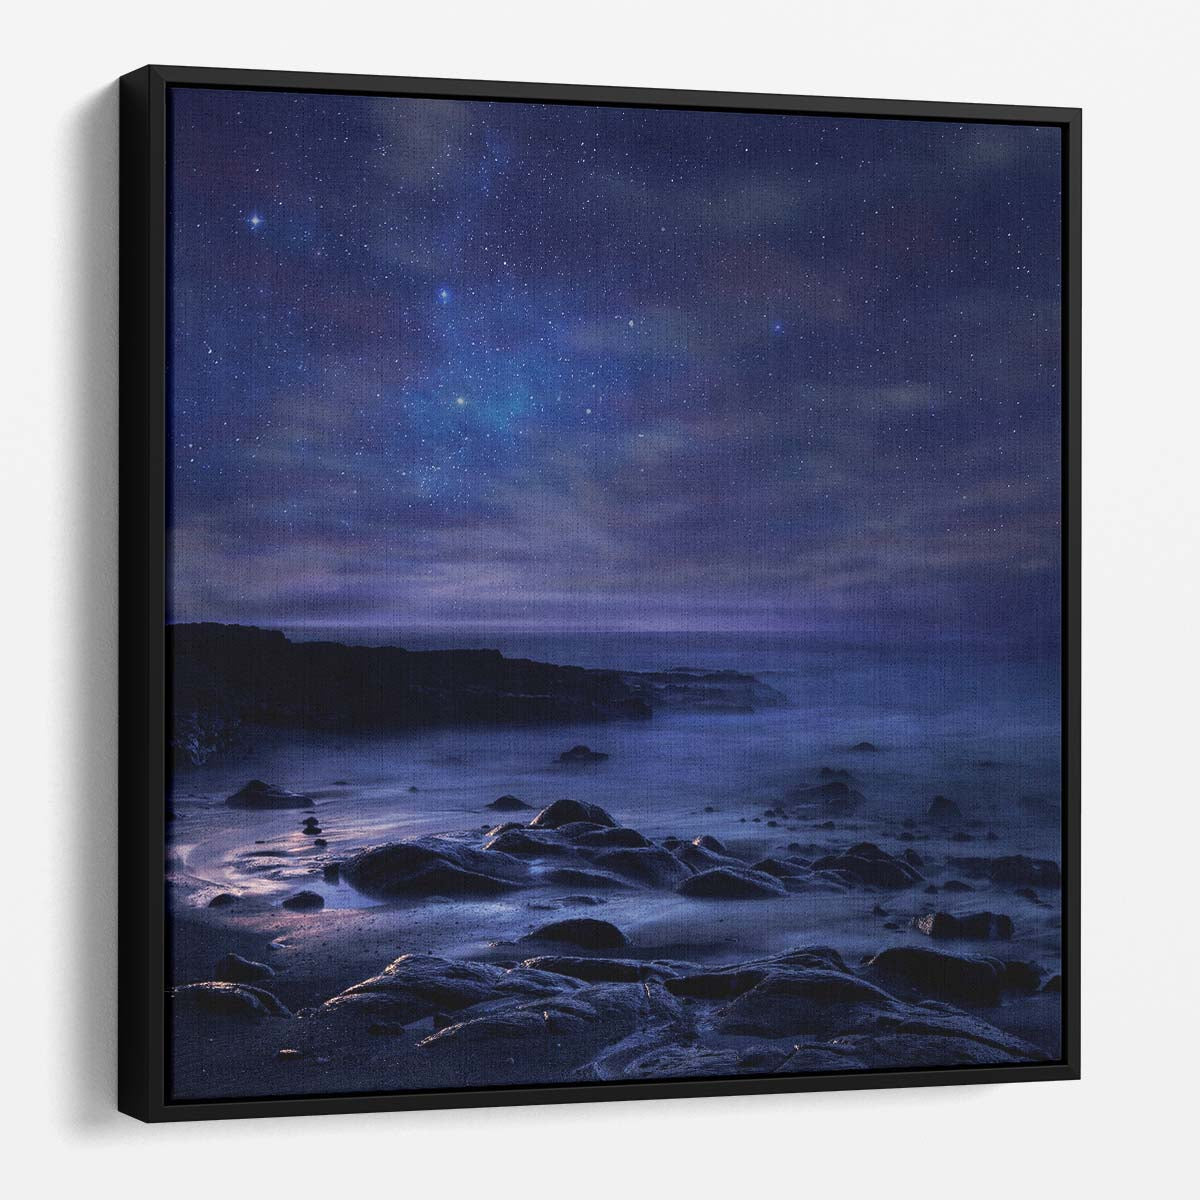 Serenity of the Sea & Starlit Sky Photography Wall Art by Luxuriance Designs. Made in USA.